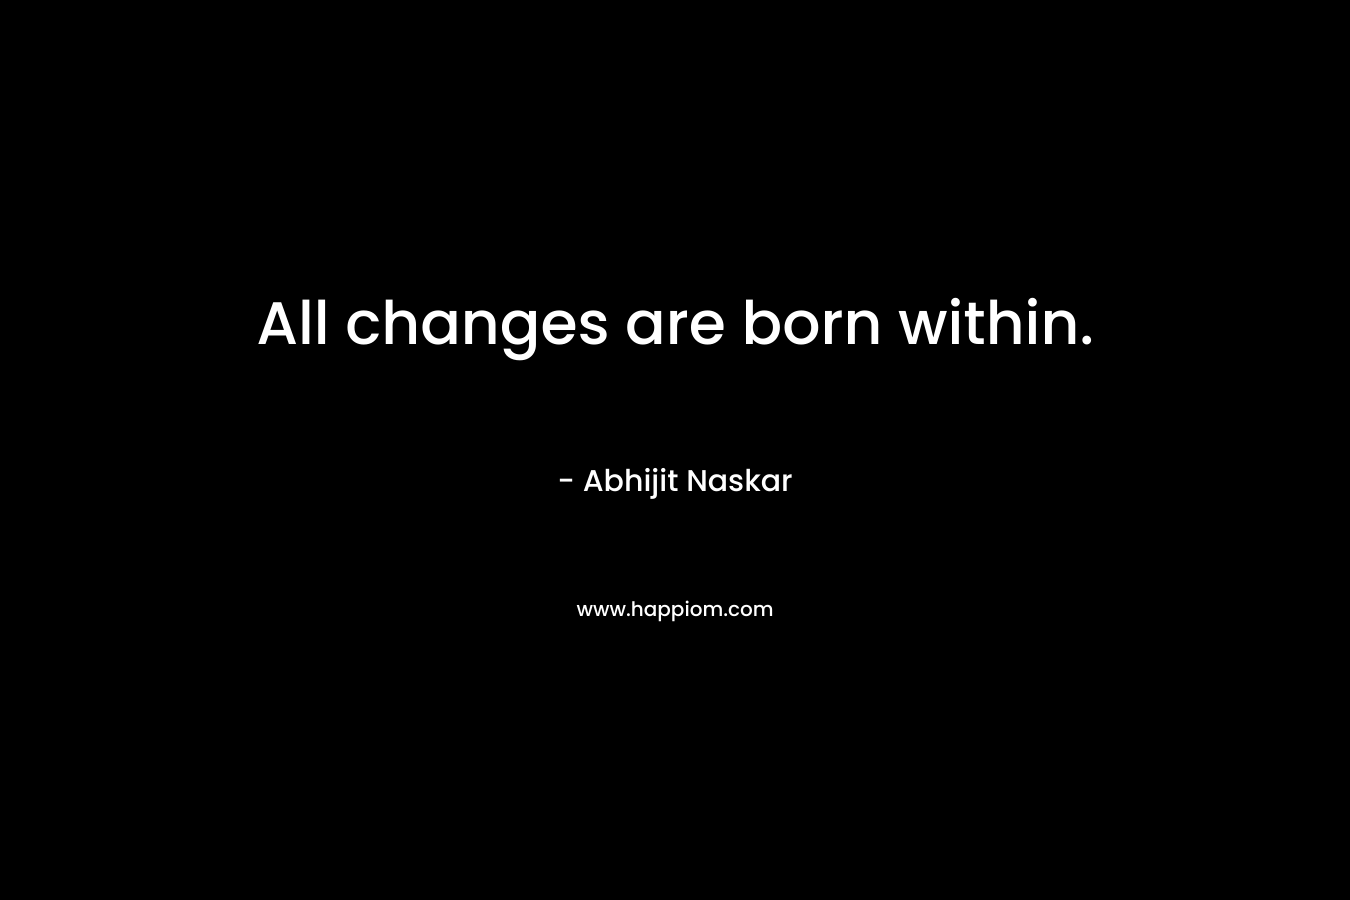 All changes are born within.